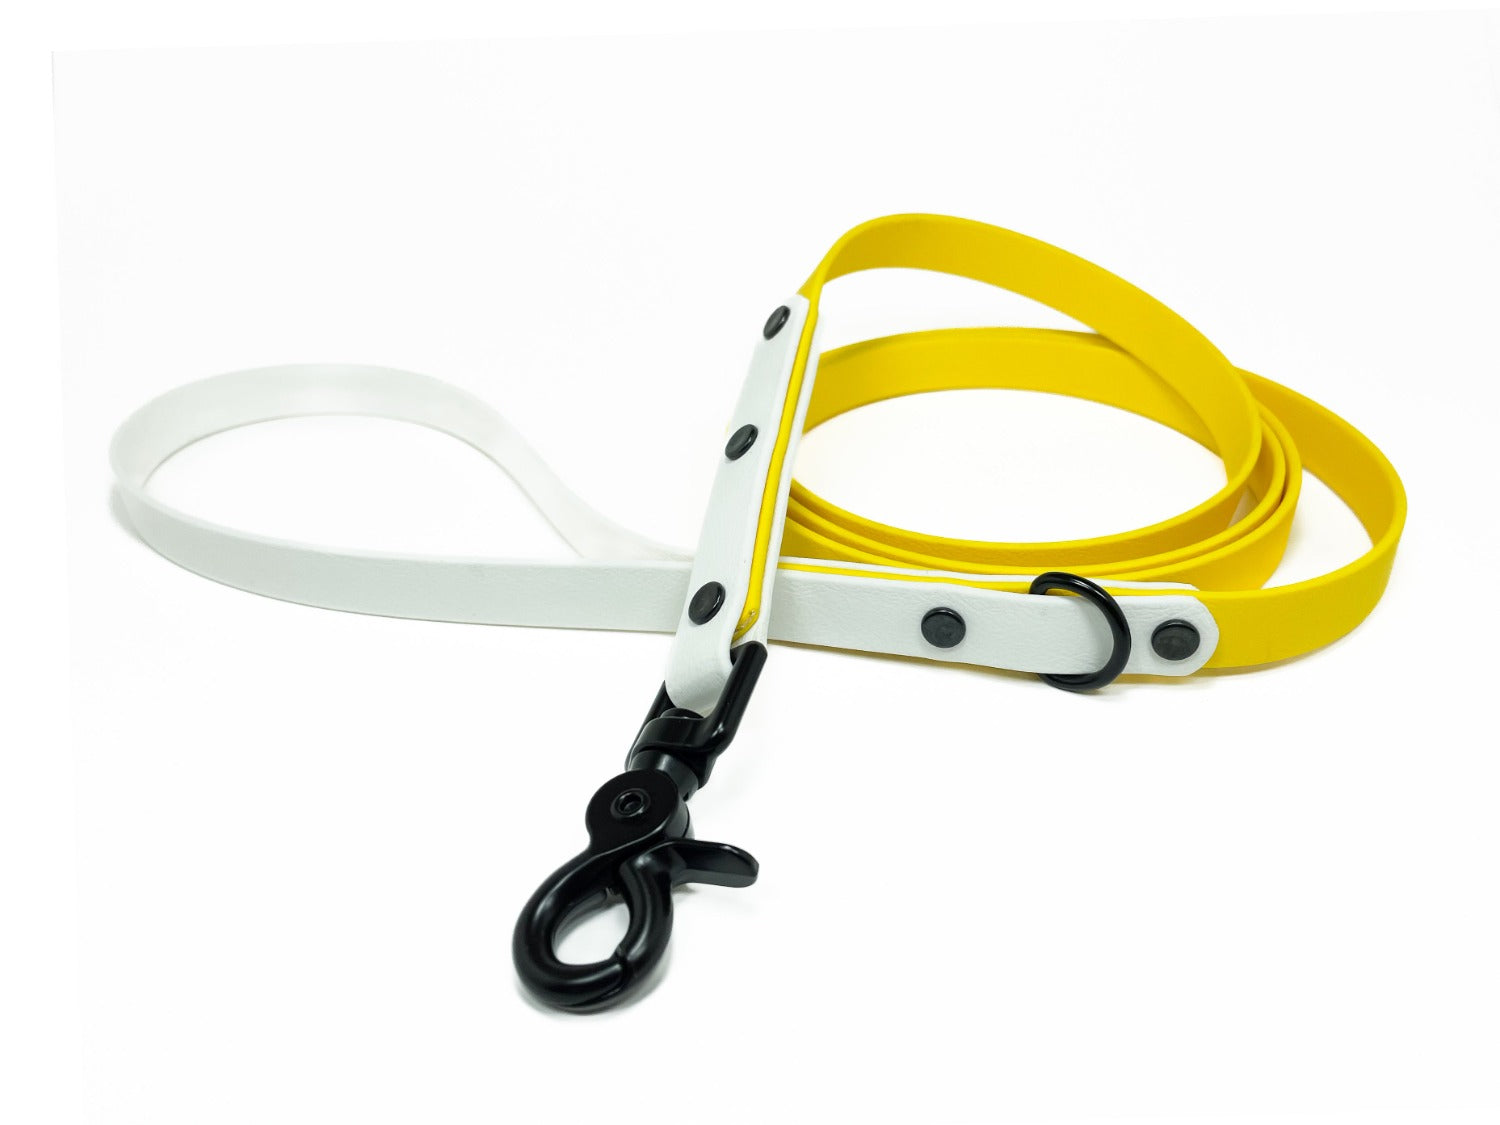 Backwoods Dog two tone BioThane waterproof dog leash in yellow and white with black hardware